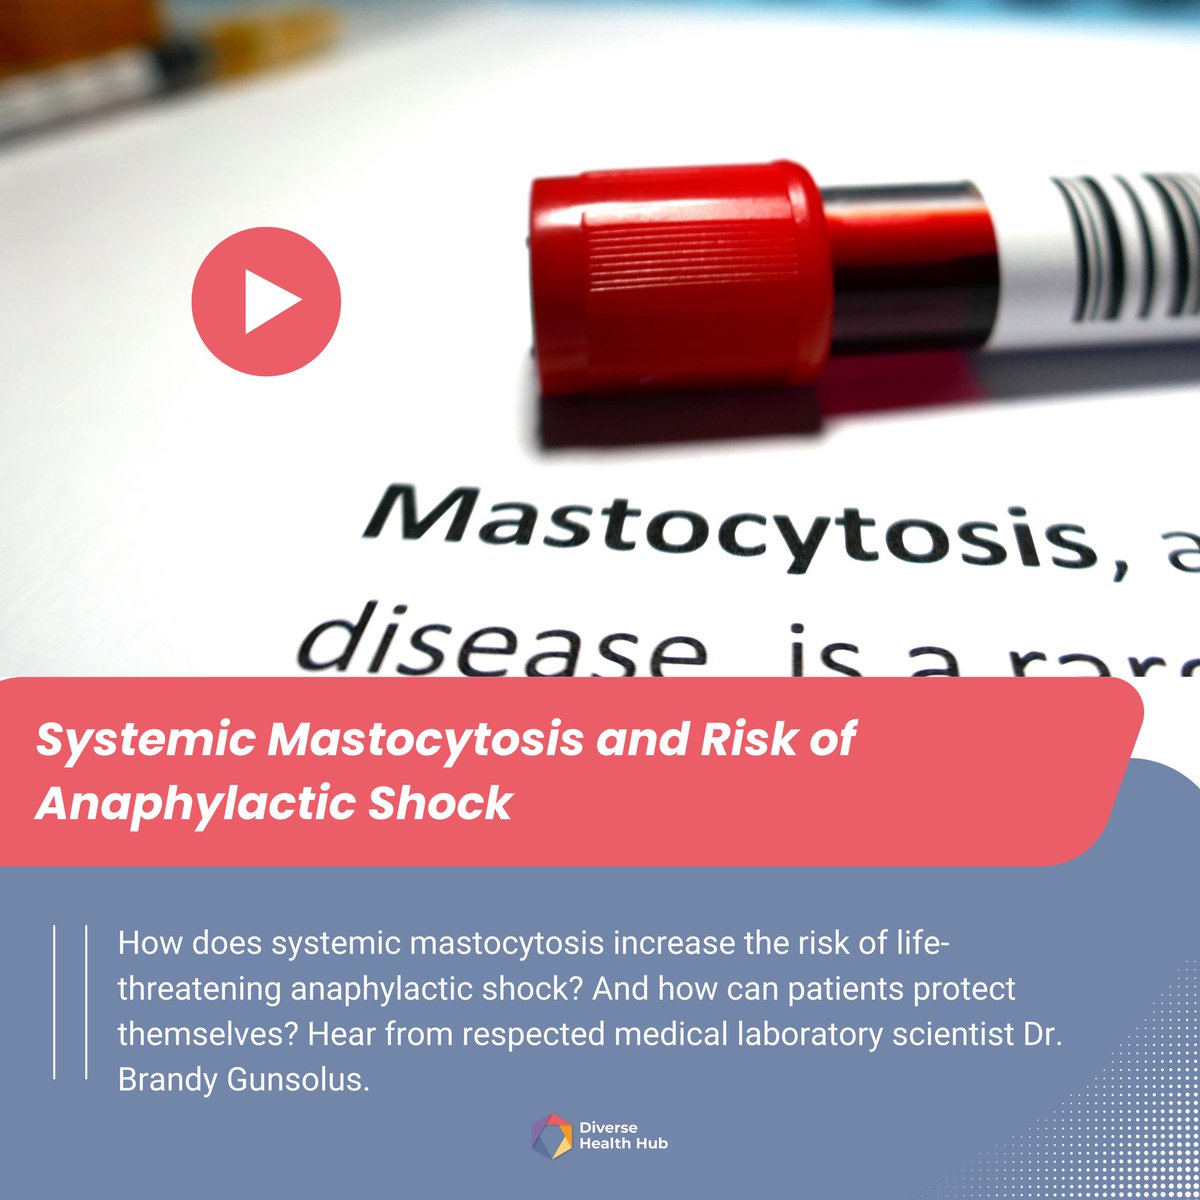 🚨New #diagnoticsdecoded 🎥! Did you know #systemicmastocytosis can increase the risk of life-threatening #anaphylacticshock? In our new short video, MLS Dr. Brandy Gunsolus @BnrdG explains the risks and how patients can protect themselves. Watch 👉 bit.ly/4dpO6JS